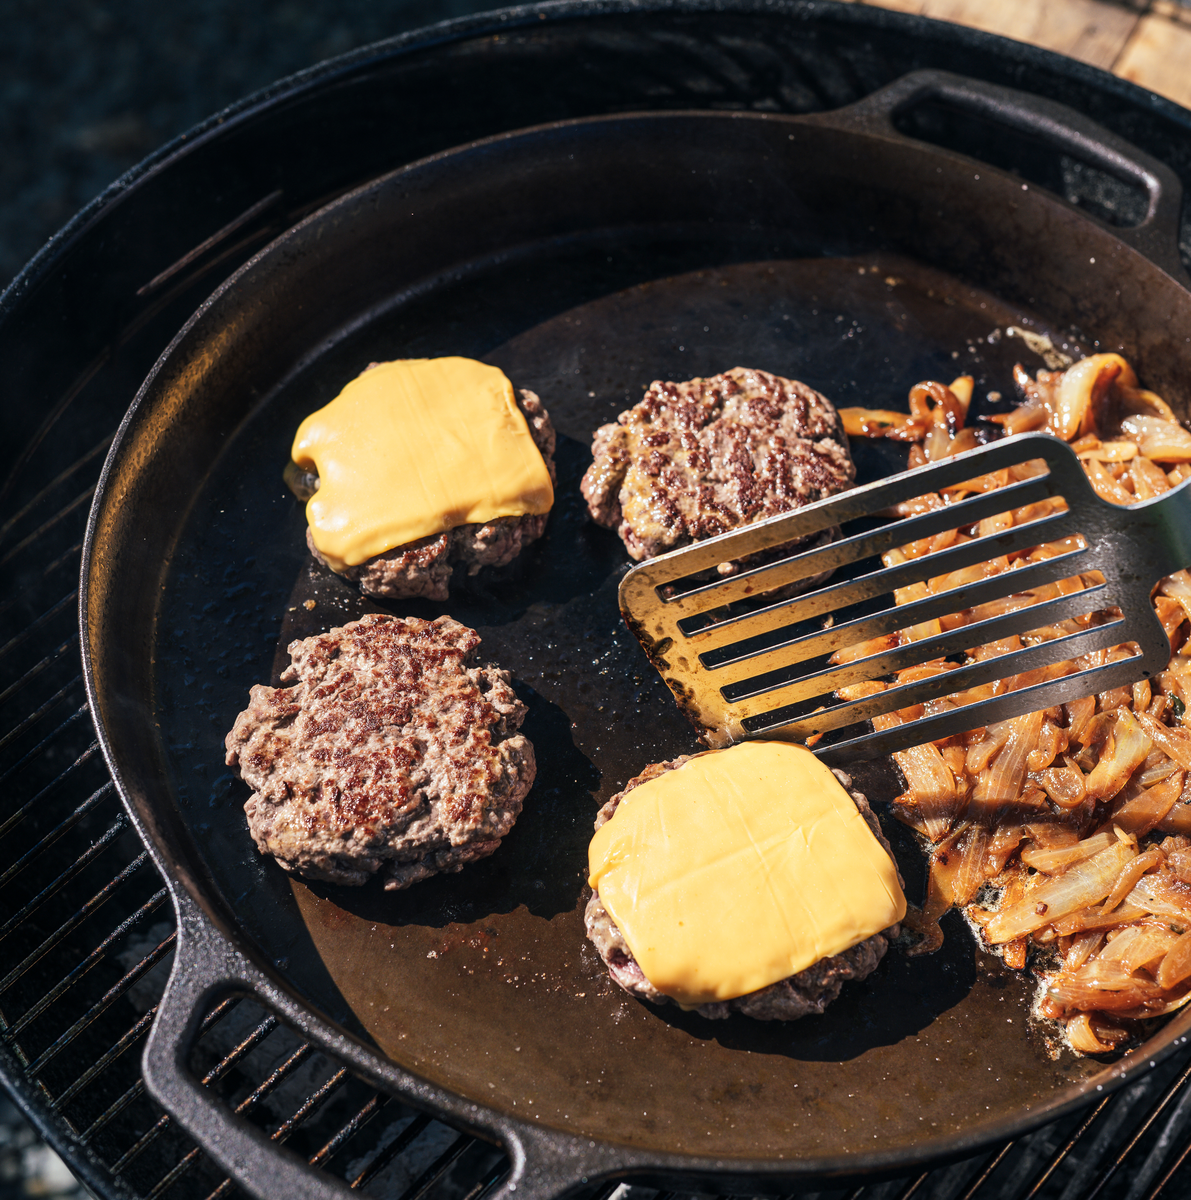 Field Company Cast Iron Skillet Review: Cook better food